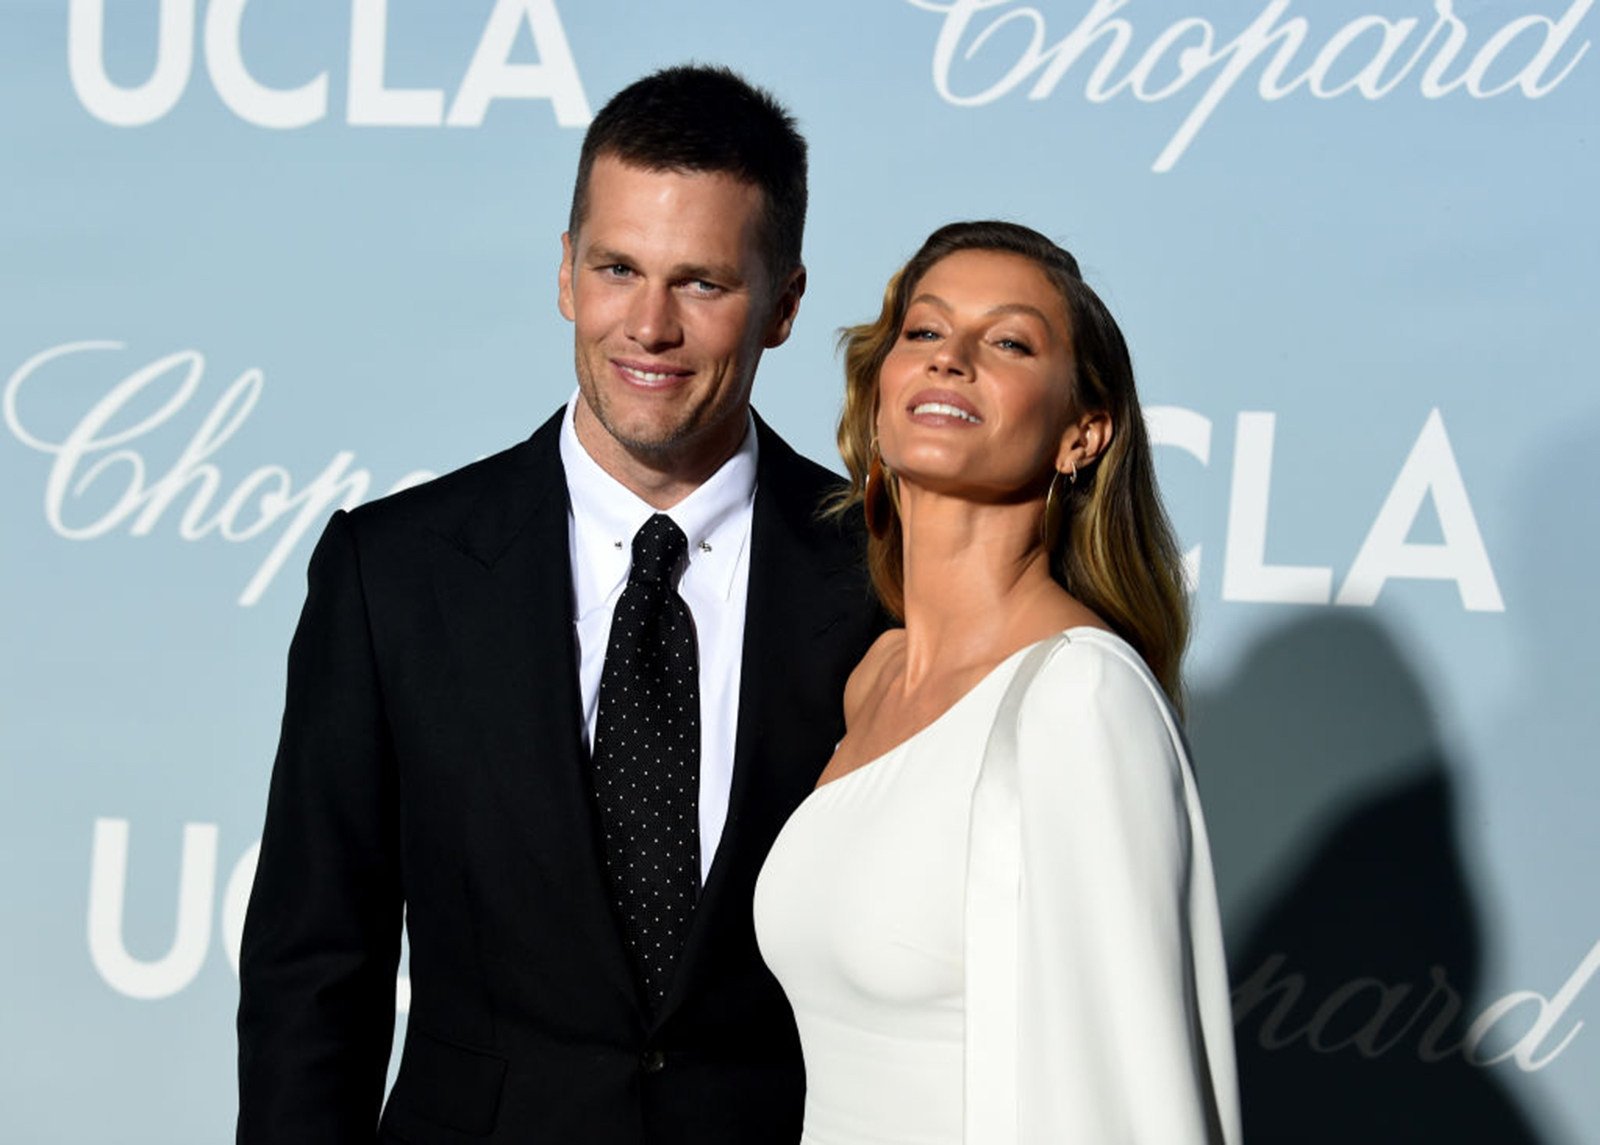 Tom Brady, left, and his ex-wife Gisele Bundchen 2019. Photo: Getty Images / TNS